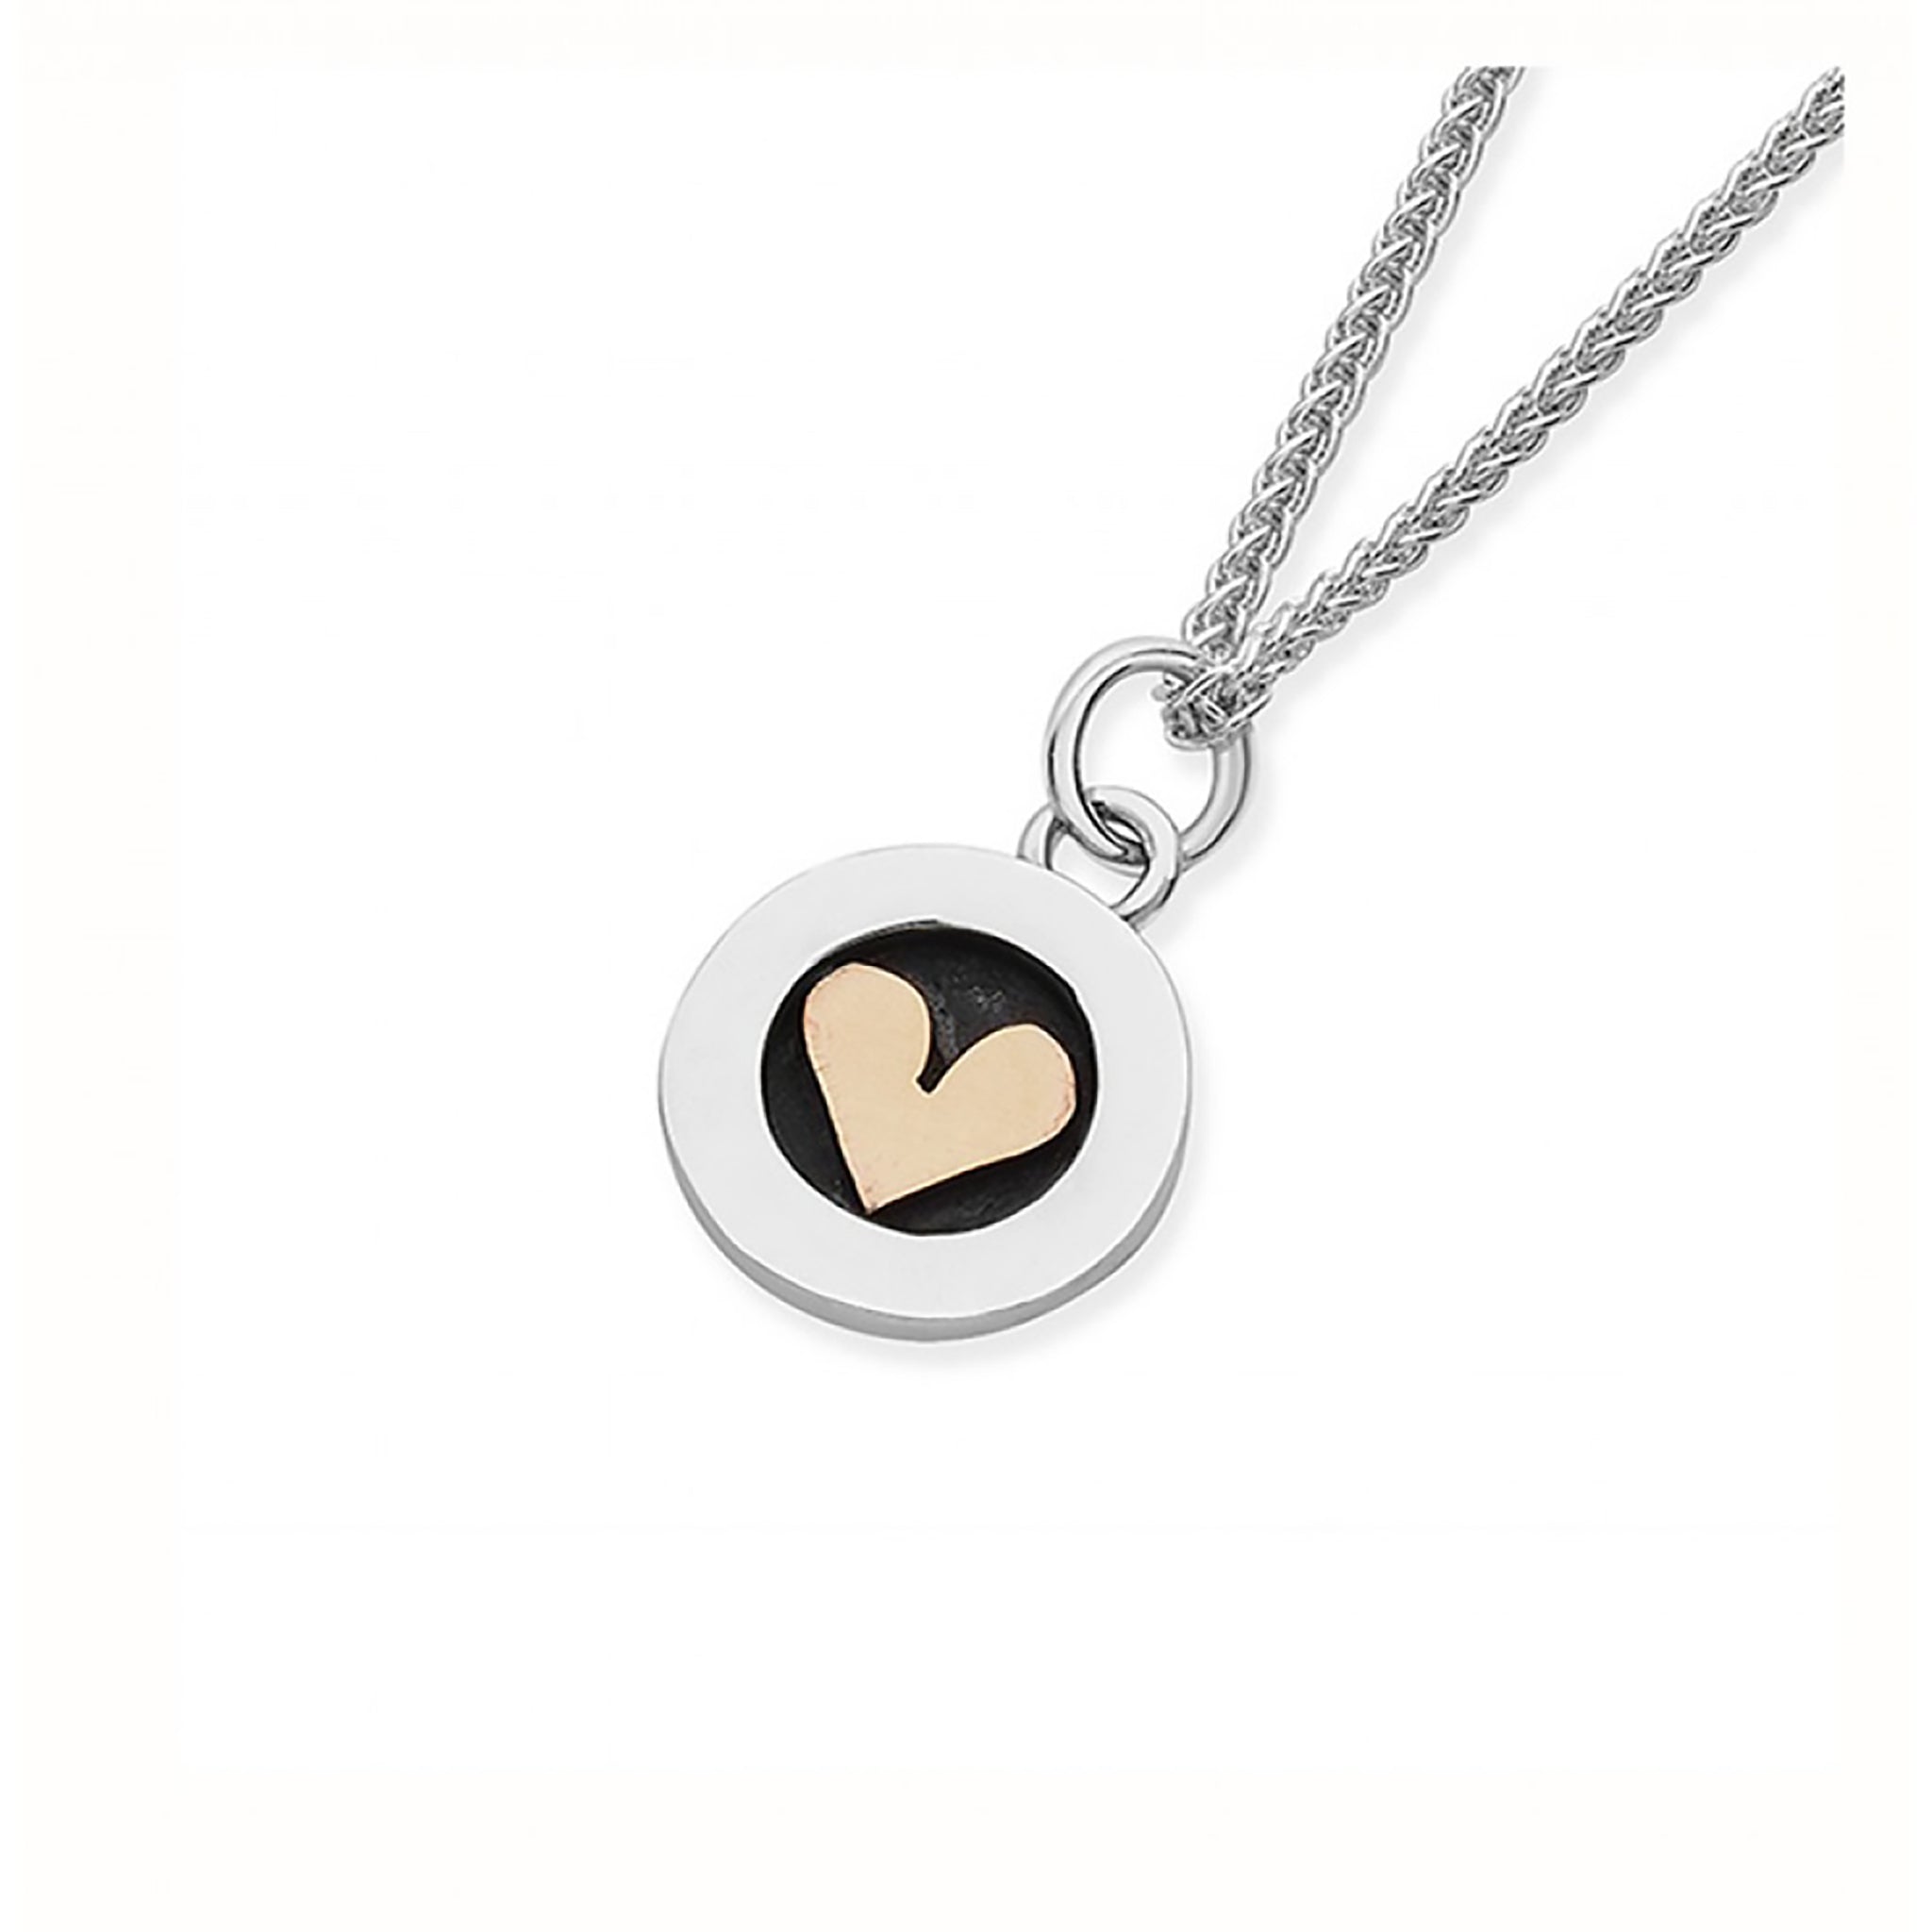 Silver pendant in simple round shape with oxidisation and little gold heart in the centre, on a silver chain